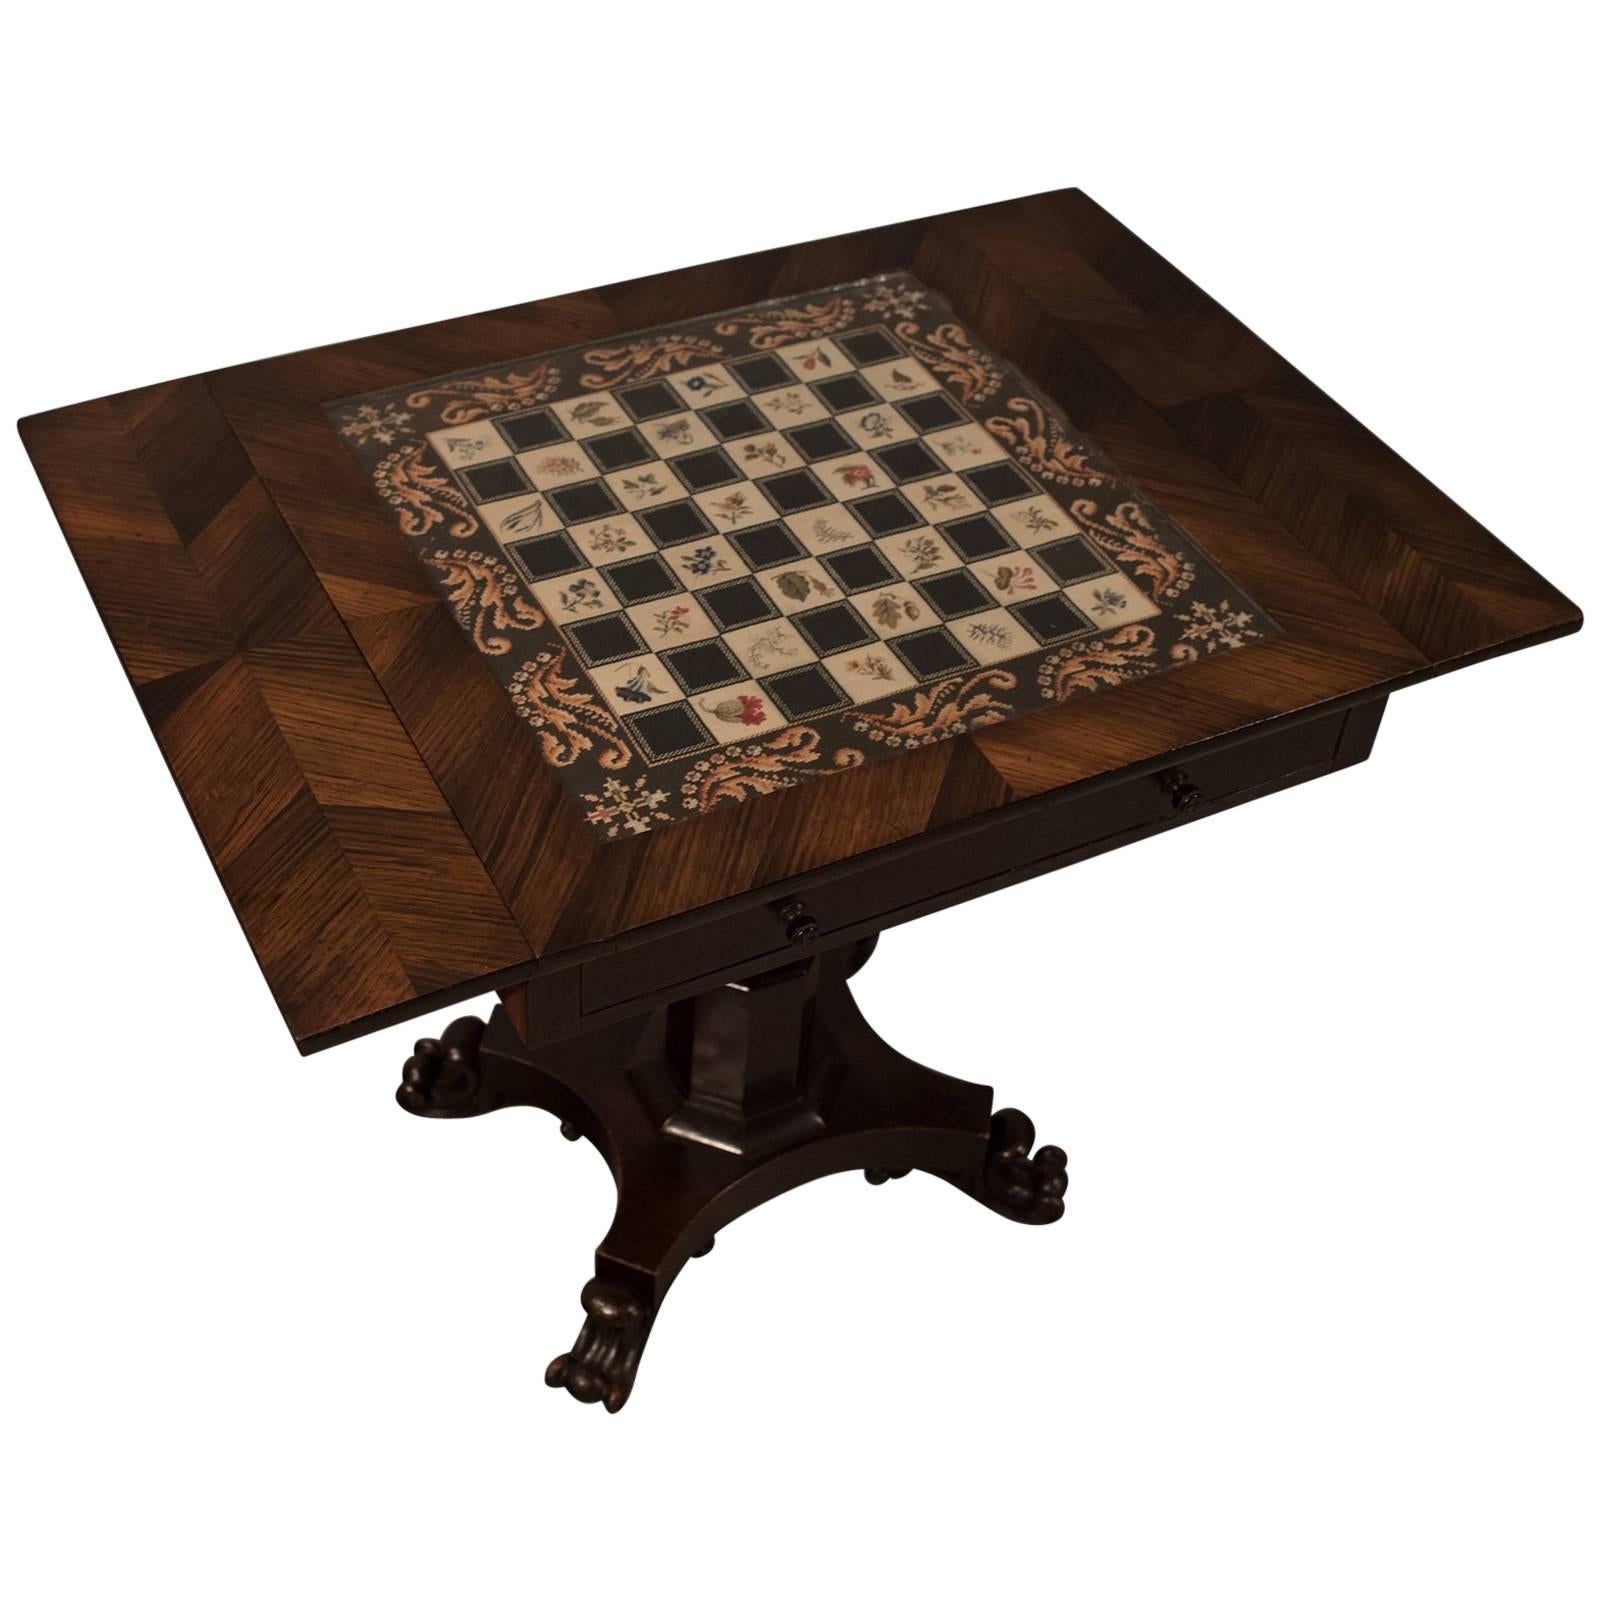 Antique Chess Board Games Table, Quality English Regency in Kingwood, circa 1820